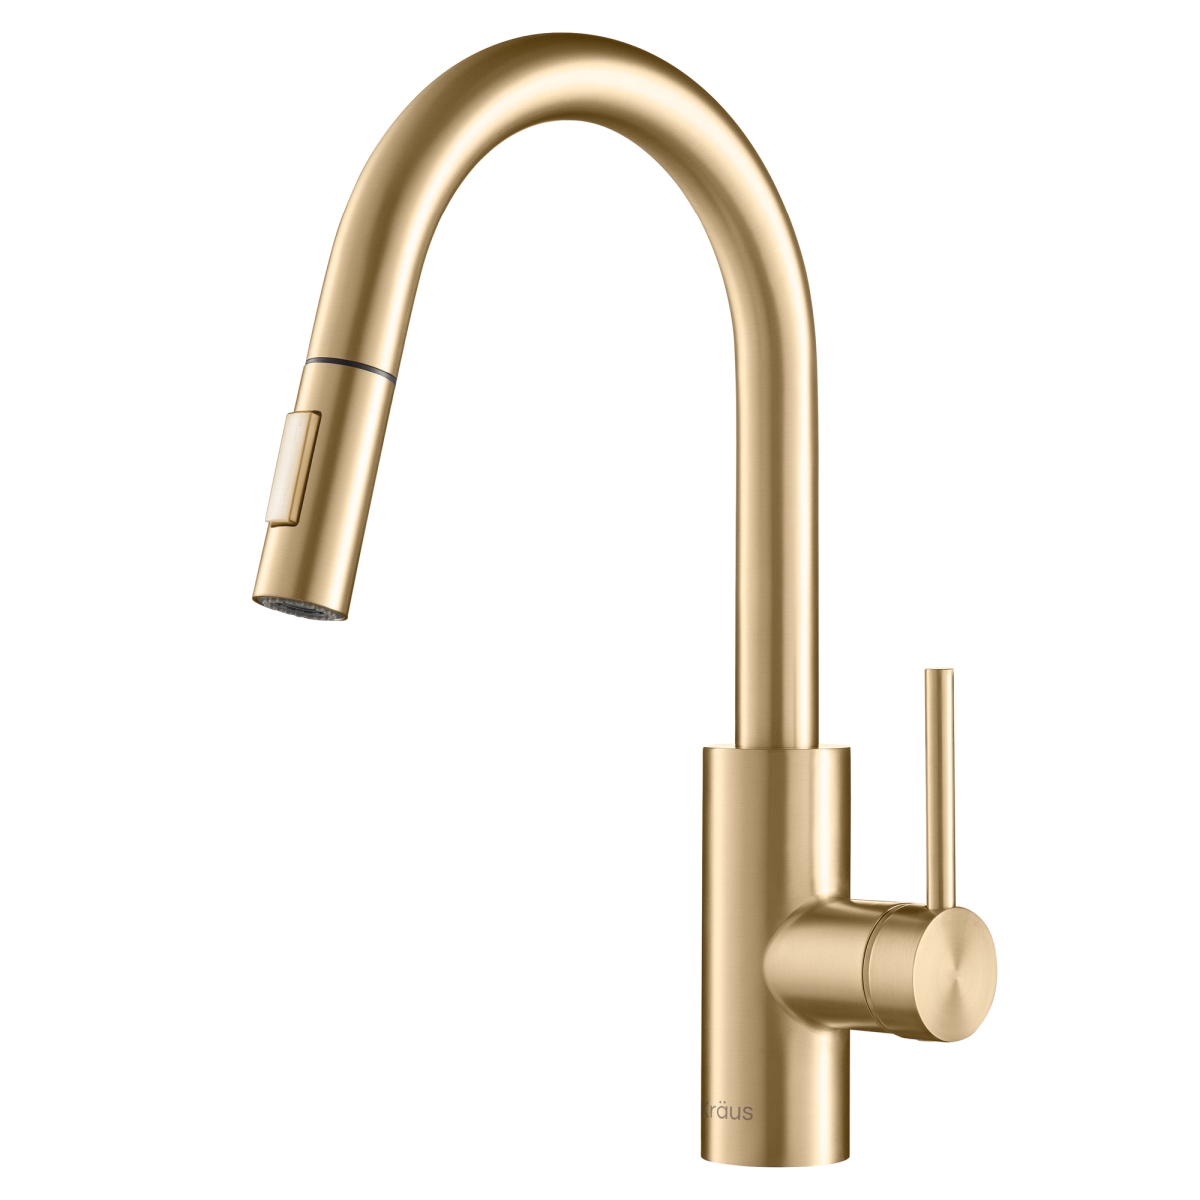 Picture of Kraus KPF-2620BG Oletto Single Handle Pull Down Kitchen Faucet in Gold Finish